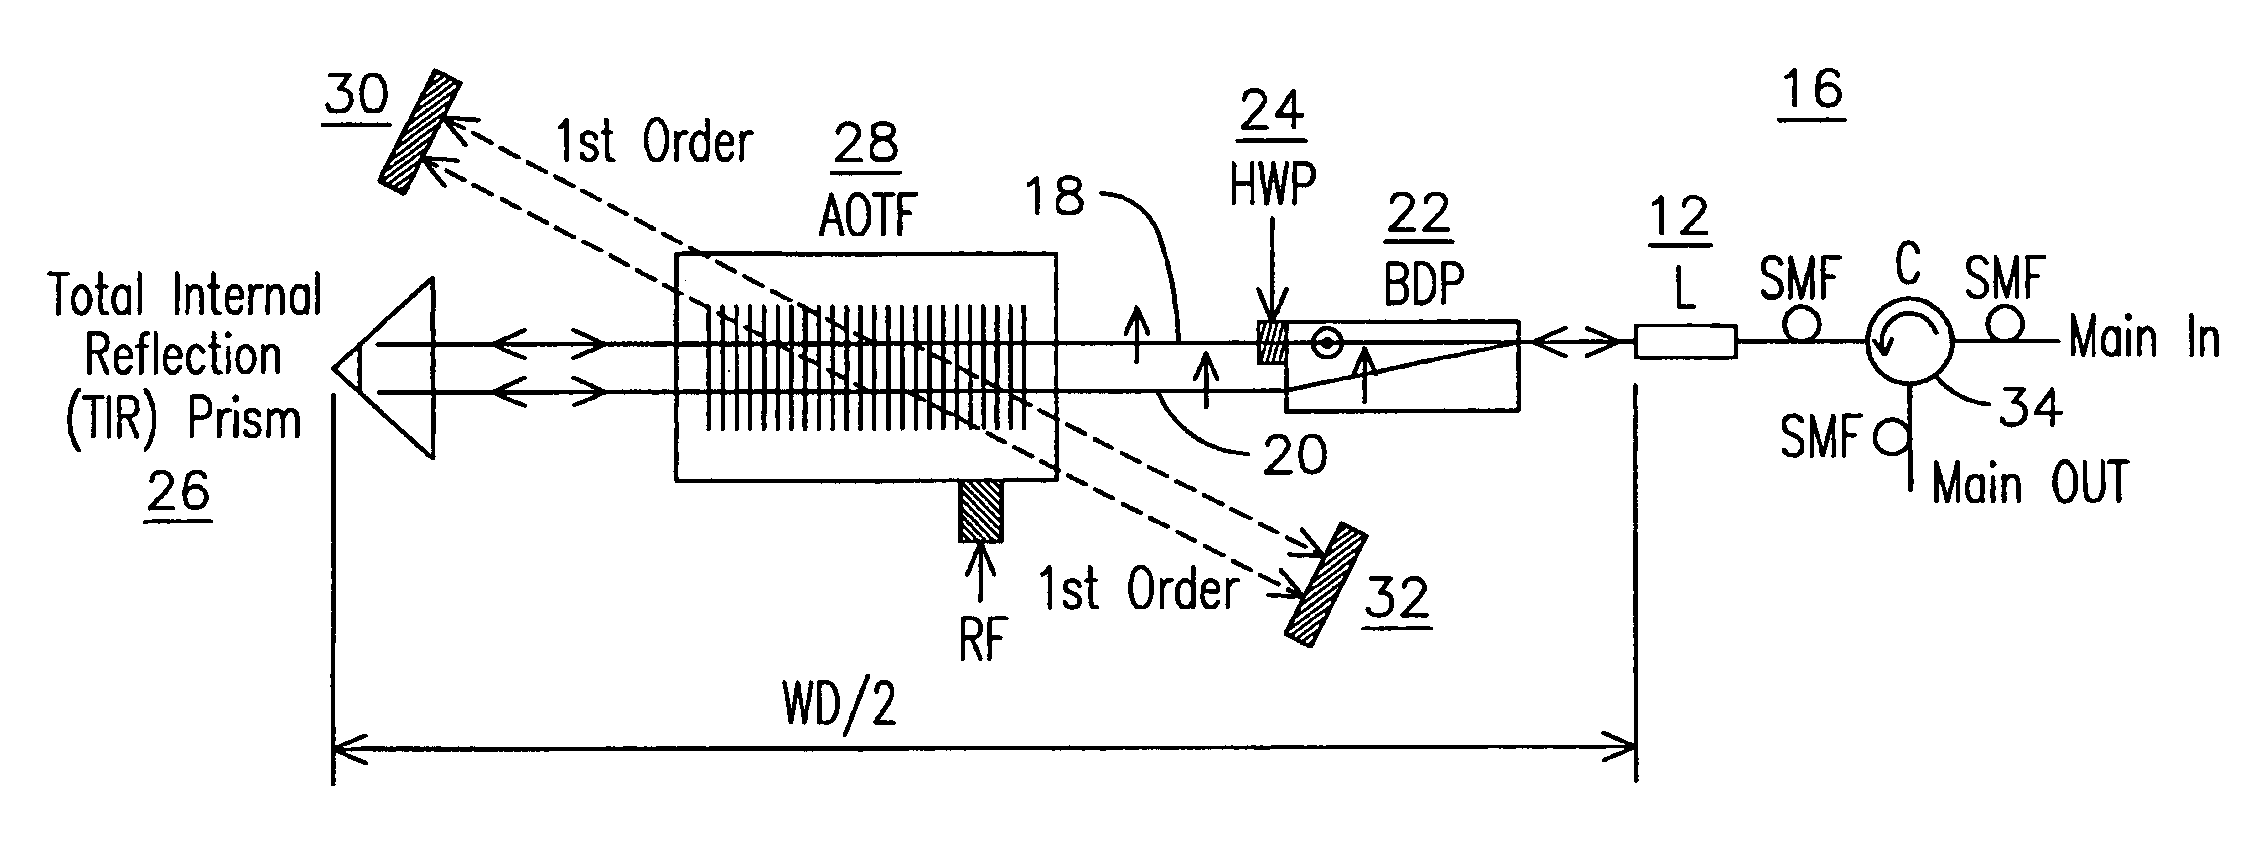 Electronically tunable optical filtering modules